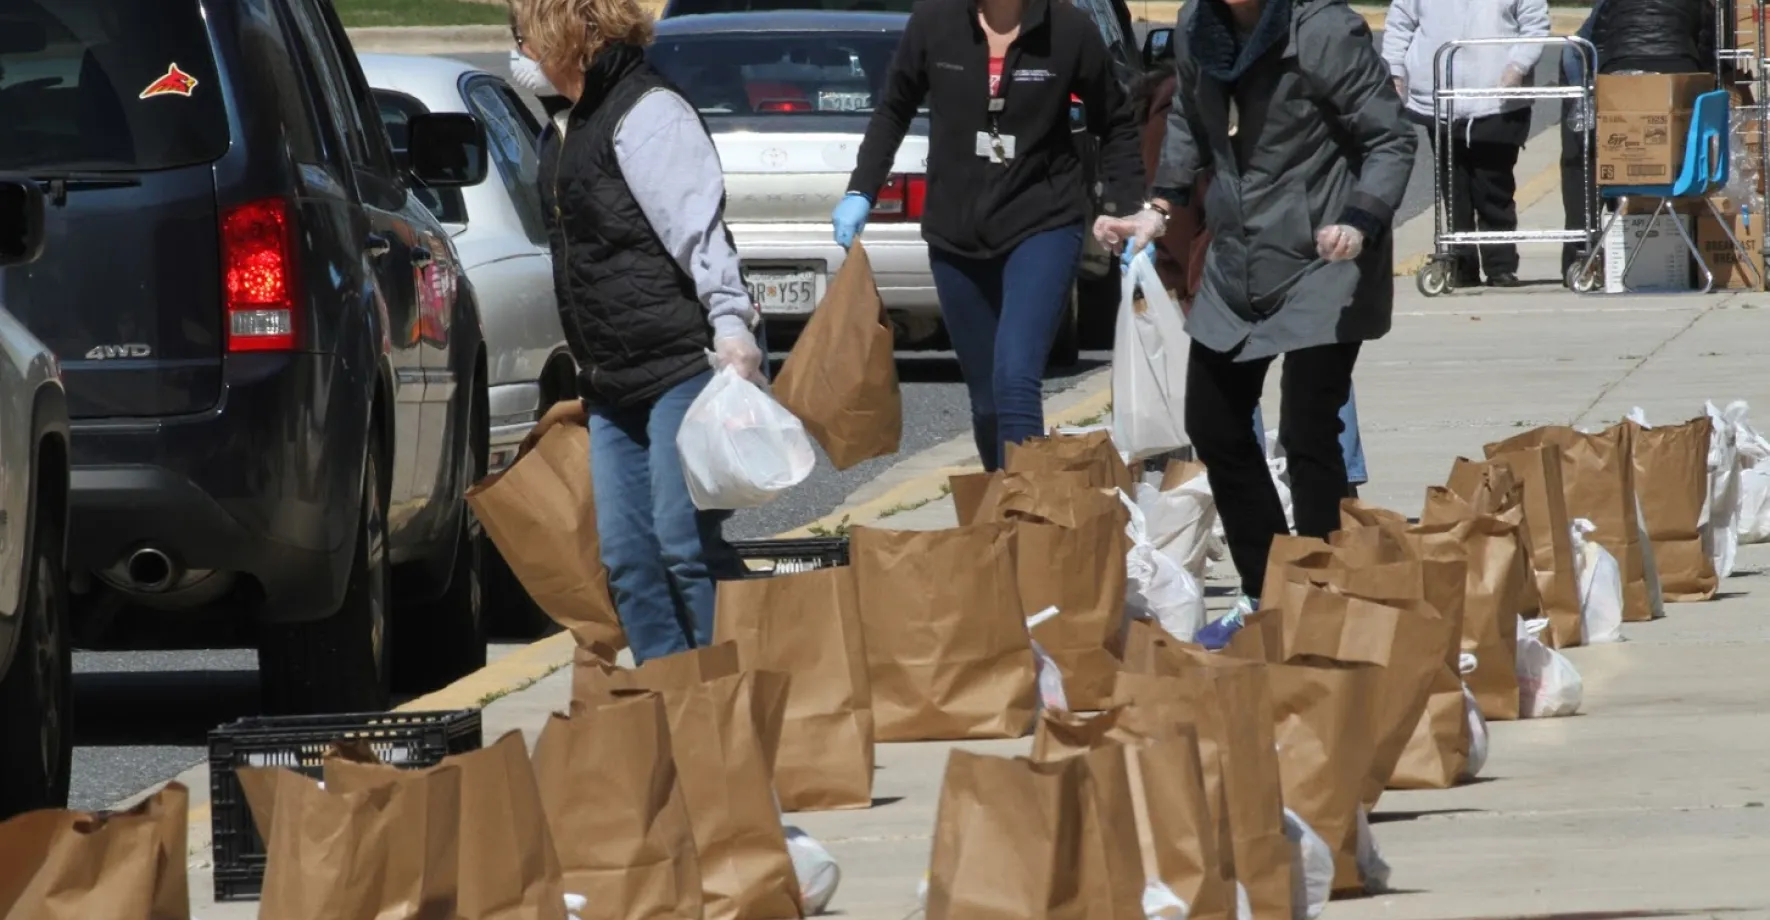 Parents picking up meals near Baltimore